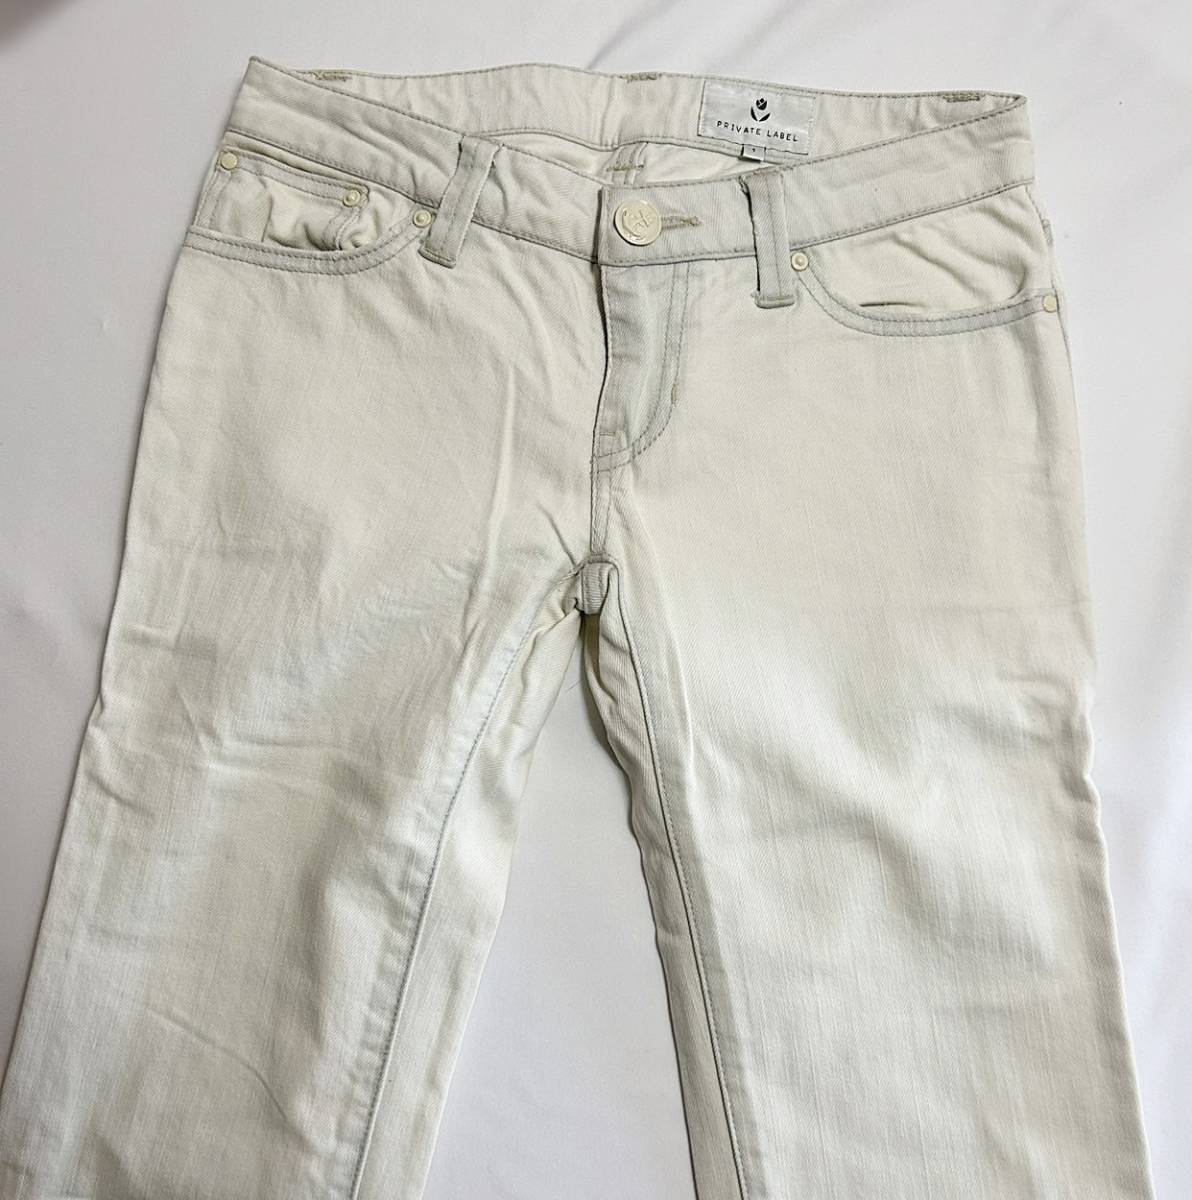  free shipping! Private Label Private label casual pants size 1 white 